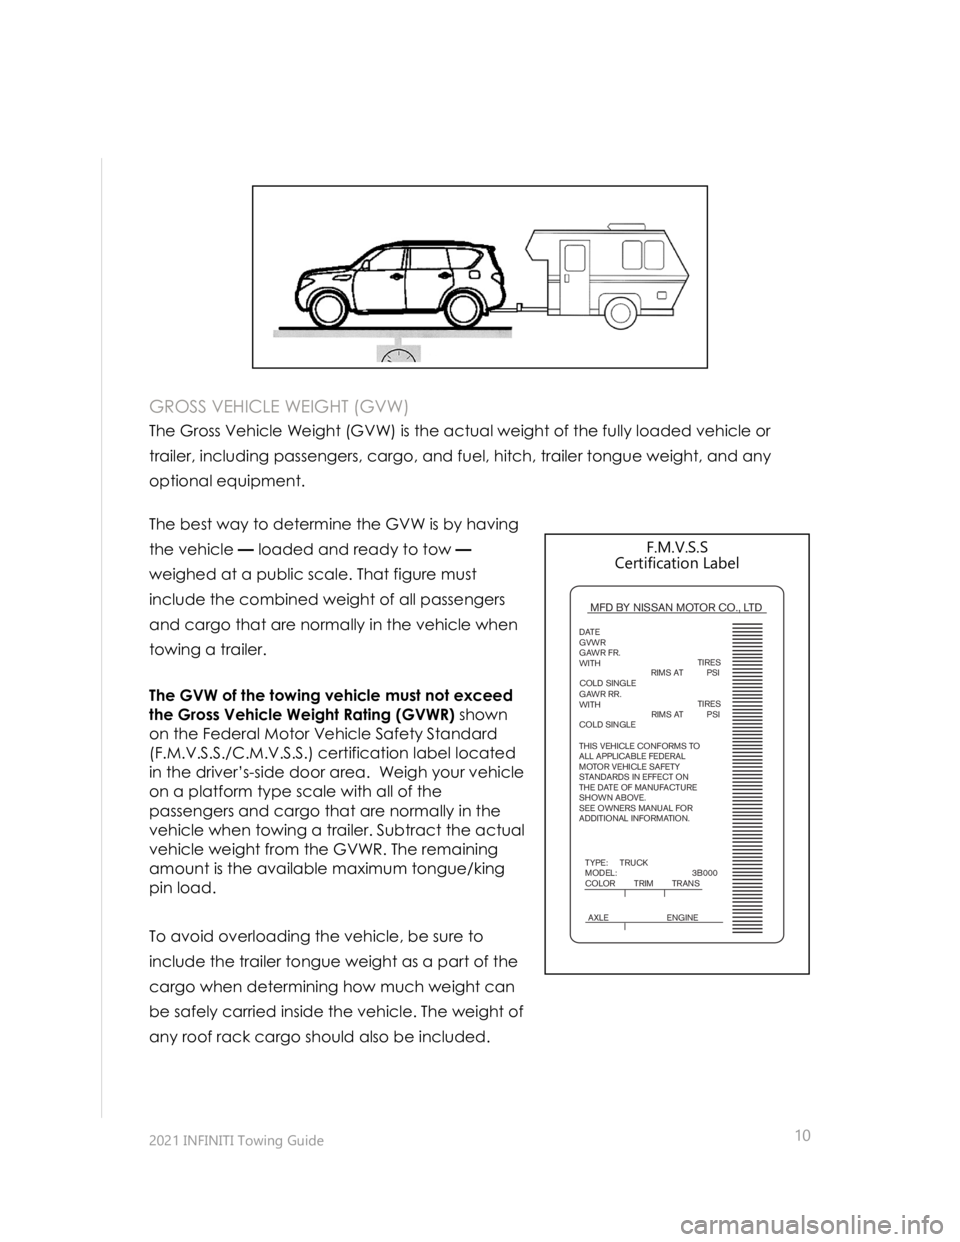 INFINITI QX50 2021  Towing Guide  
 
 
 
 
2021 INFINITI Towing Guide  
 
 
10
 
 
 
 
 
 
 
 
 
 
GROSS VEHICLE WEIGHT (GVW) 
The Gross Vehicle Weight (GVW) is the actual weight of the fully loaded vehicle or 
trailer, including pas